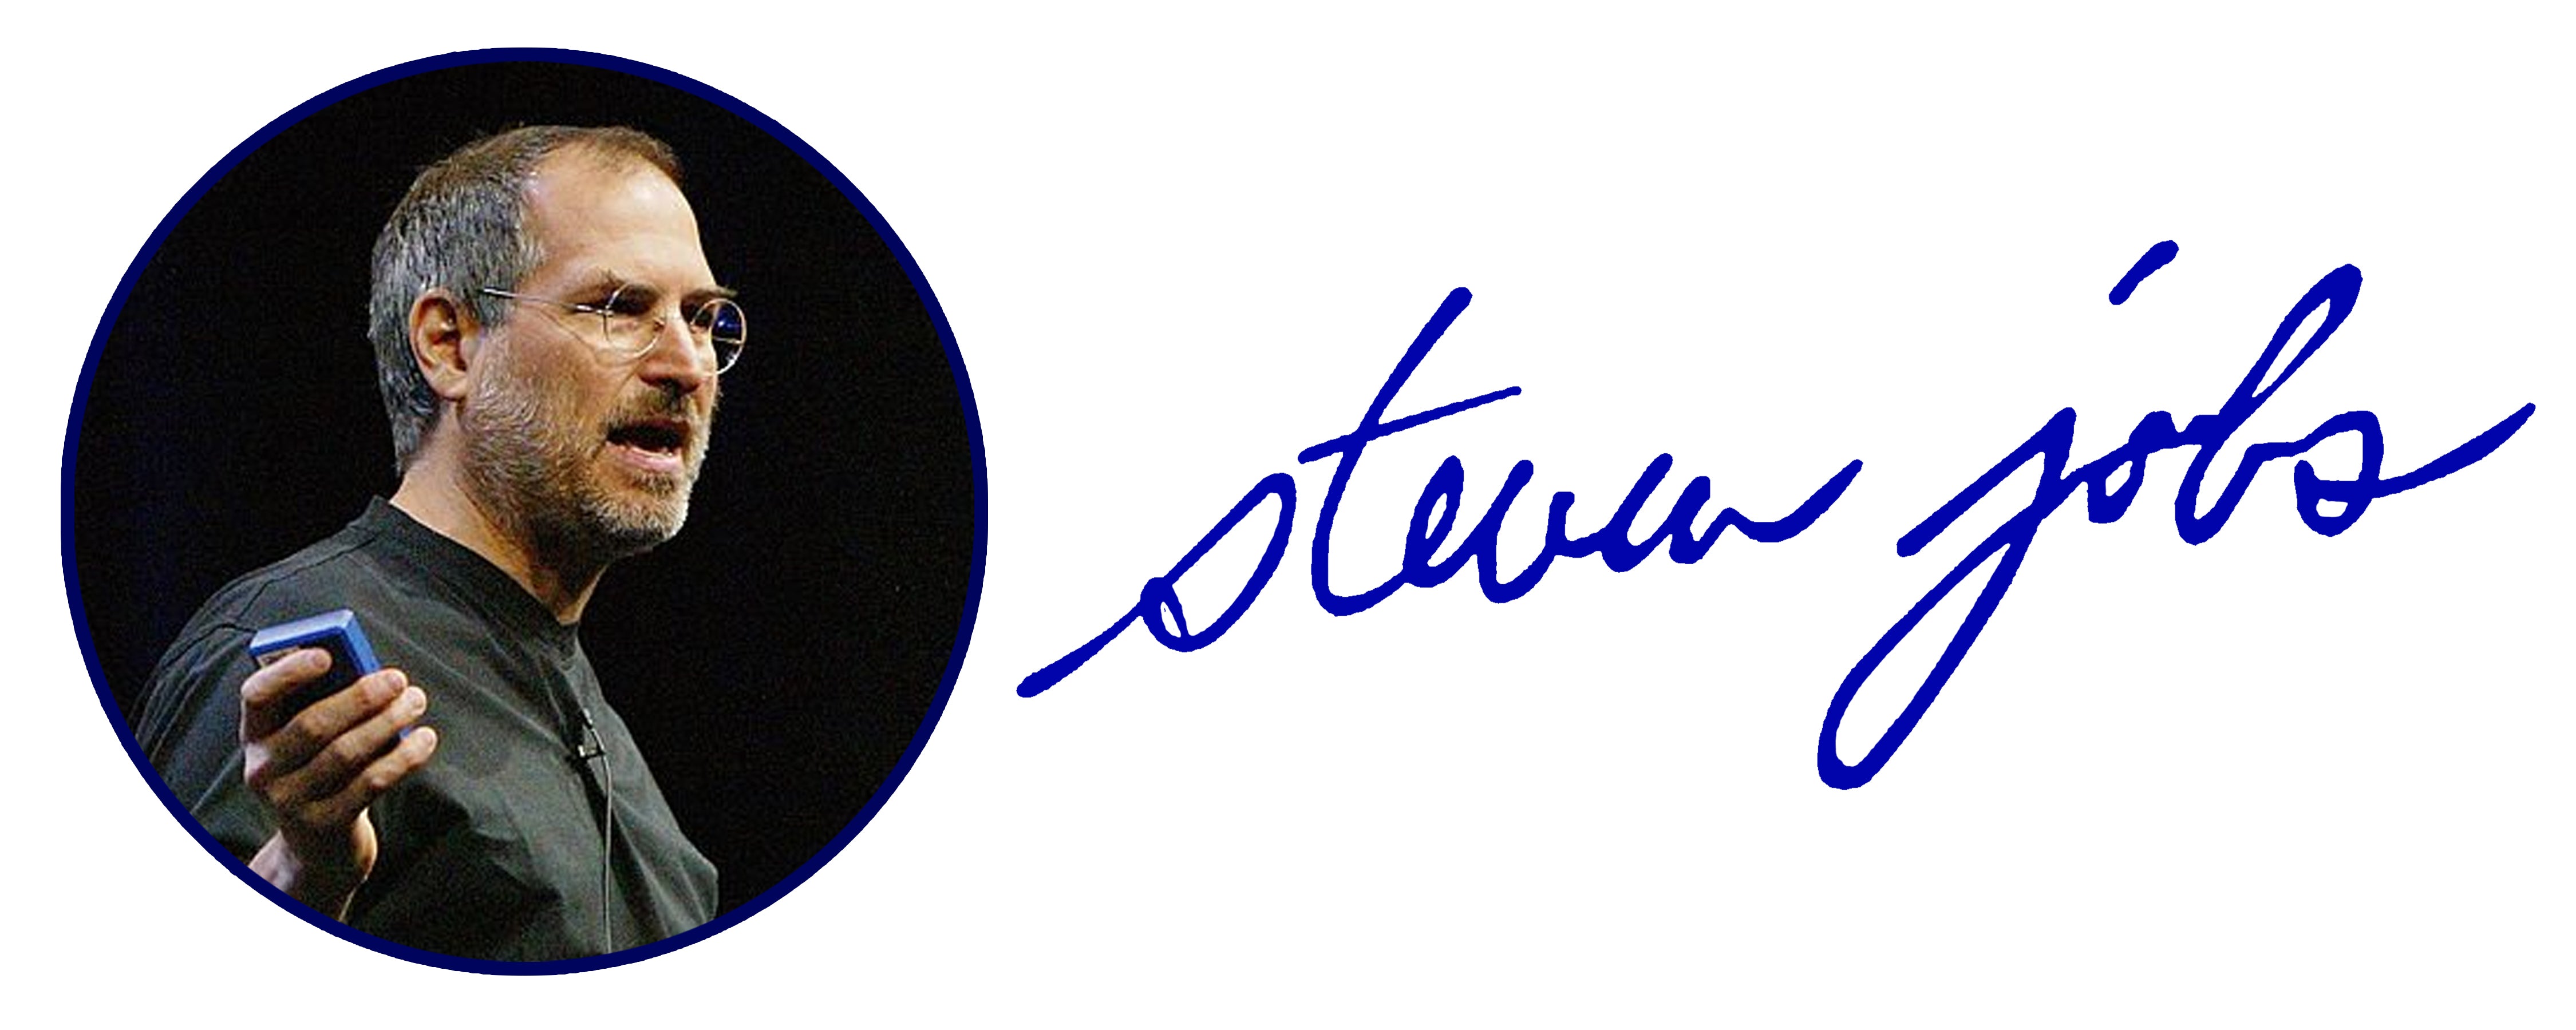 Considered a pioneer in the field of developing personal computers, Steve Jobs is an icon whose name lives on even today. His signature is in lowercase and has an angle which helped us infer that he was a very ambitious man.